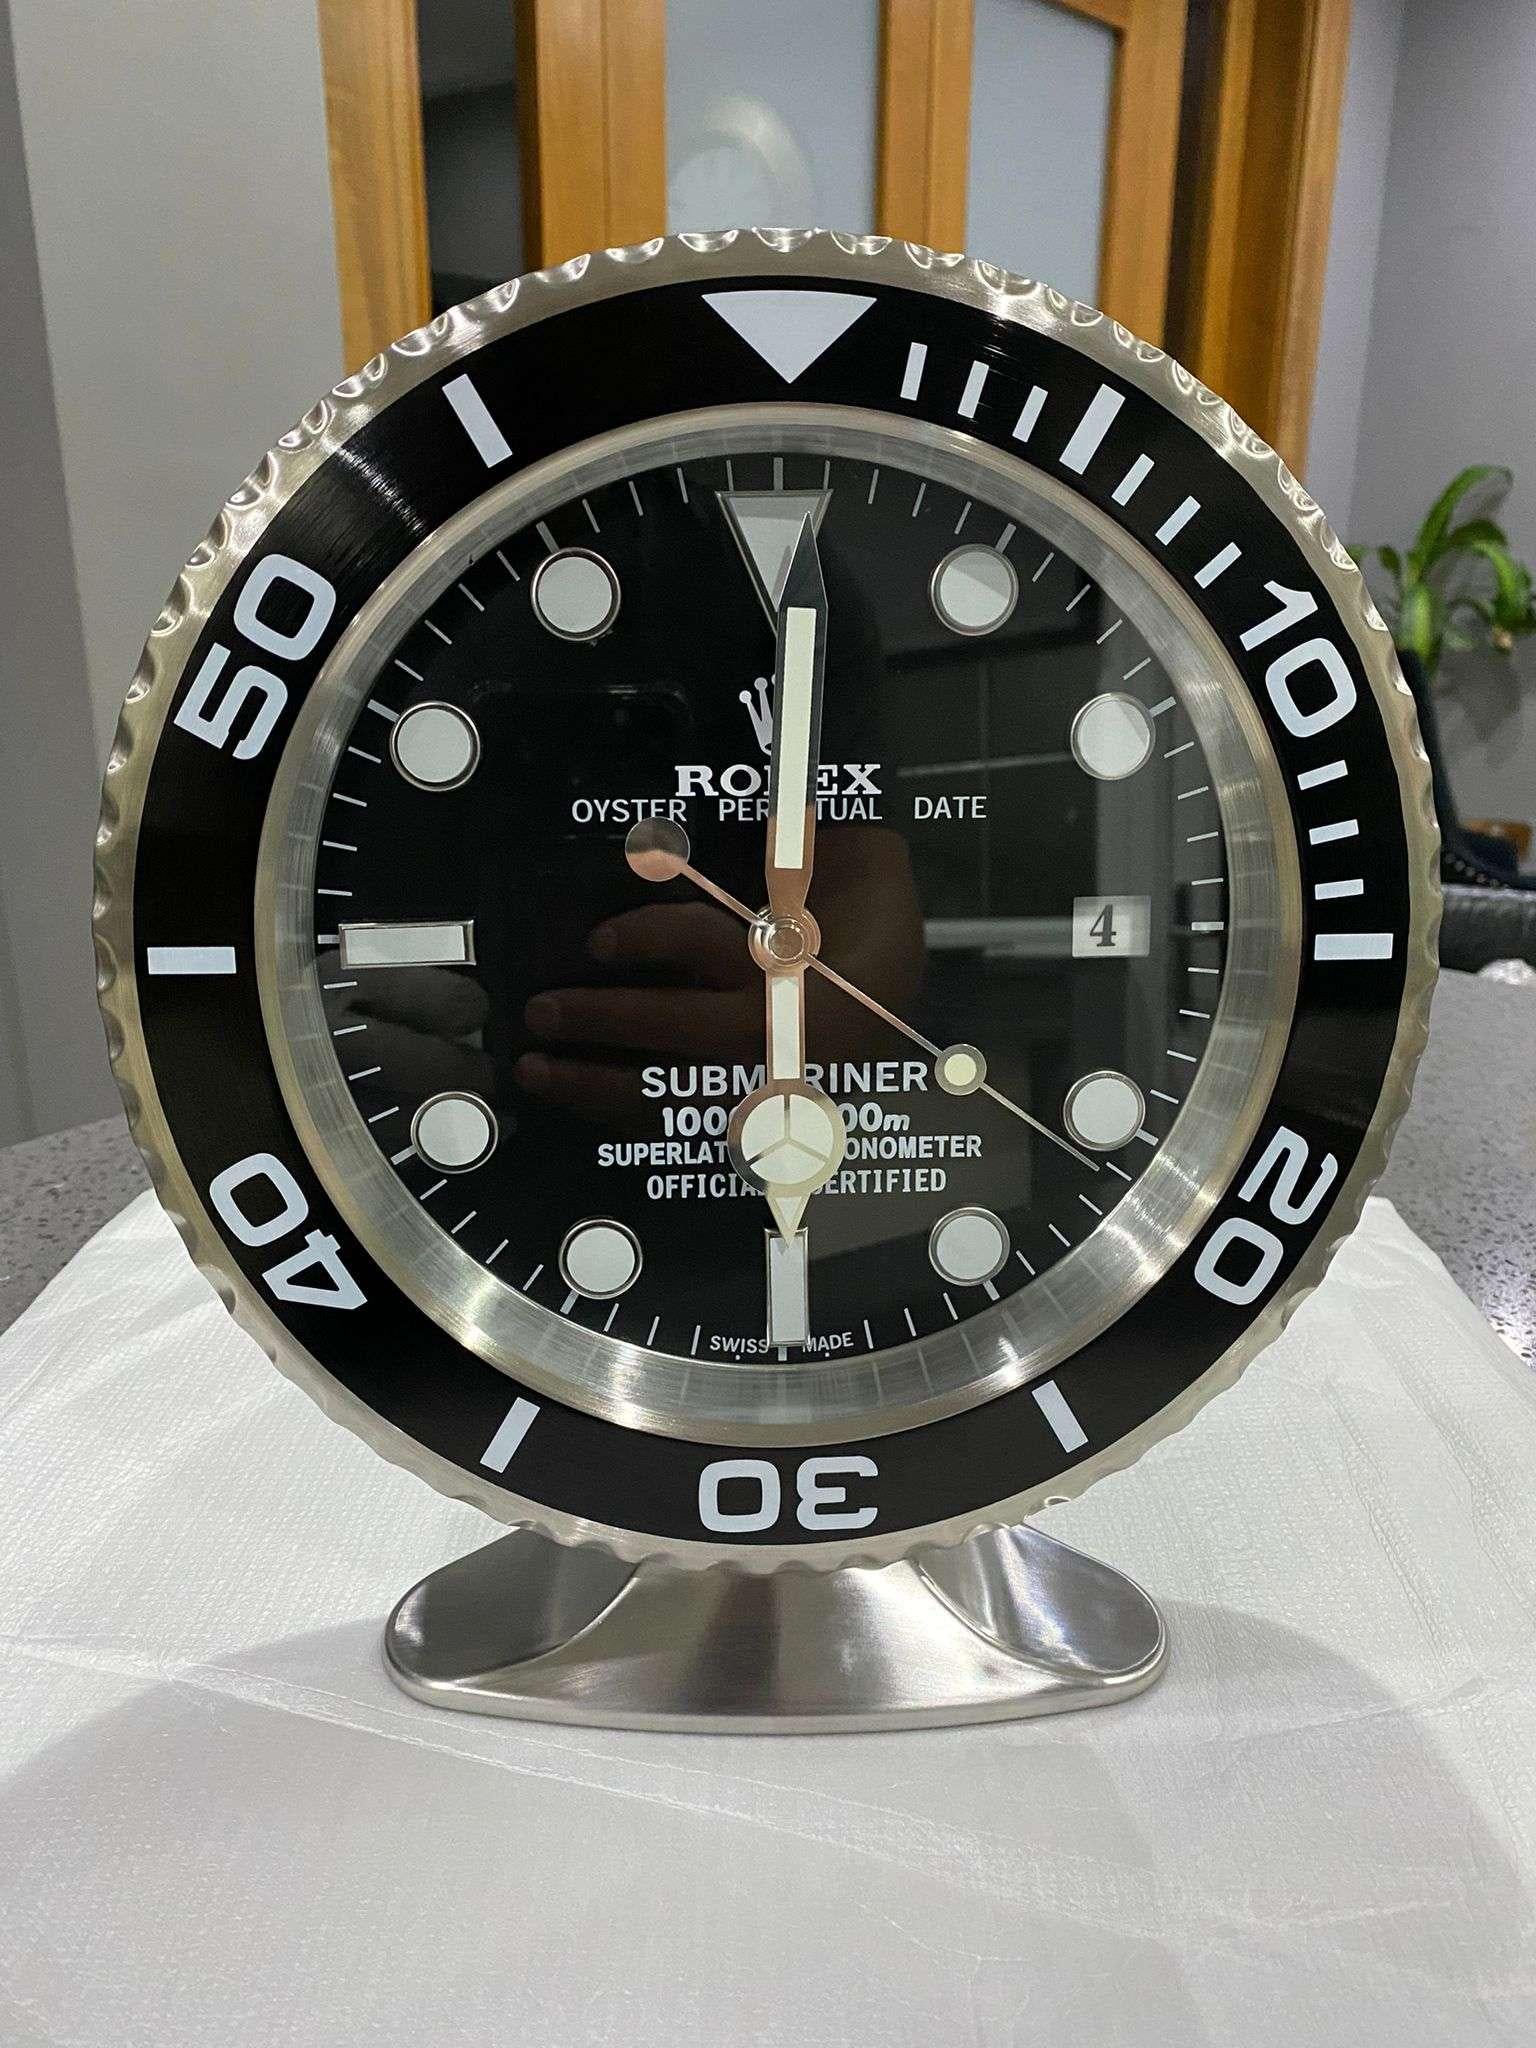 ROLEX Officially Certified Oyster Perpetual Black Submariner Desk Clock 

Luminous hands.
Fully functional date.
Sweeping hands.
Quartz movement.
Good condition, working.
Free international shipping.

These wall clocks are officially licensed by